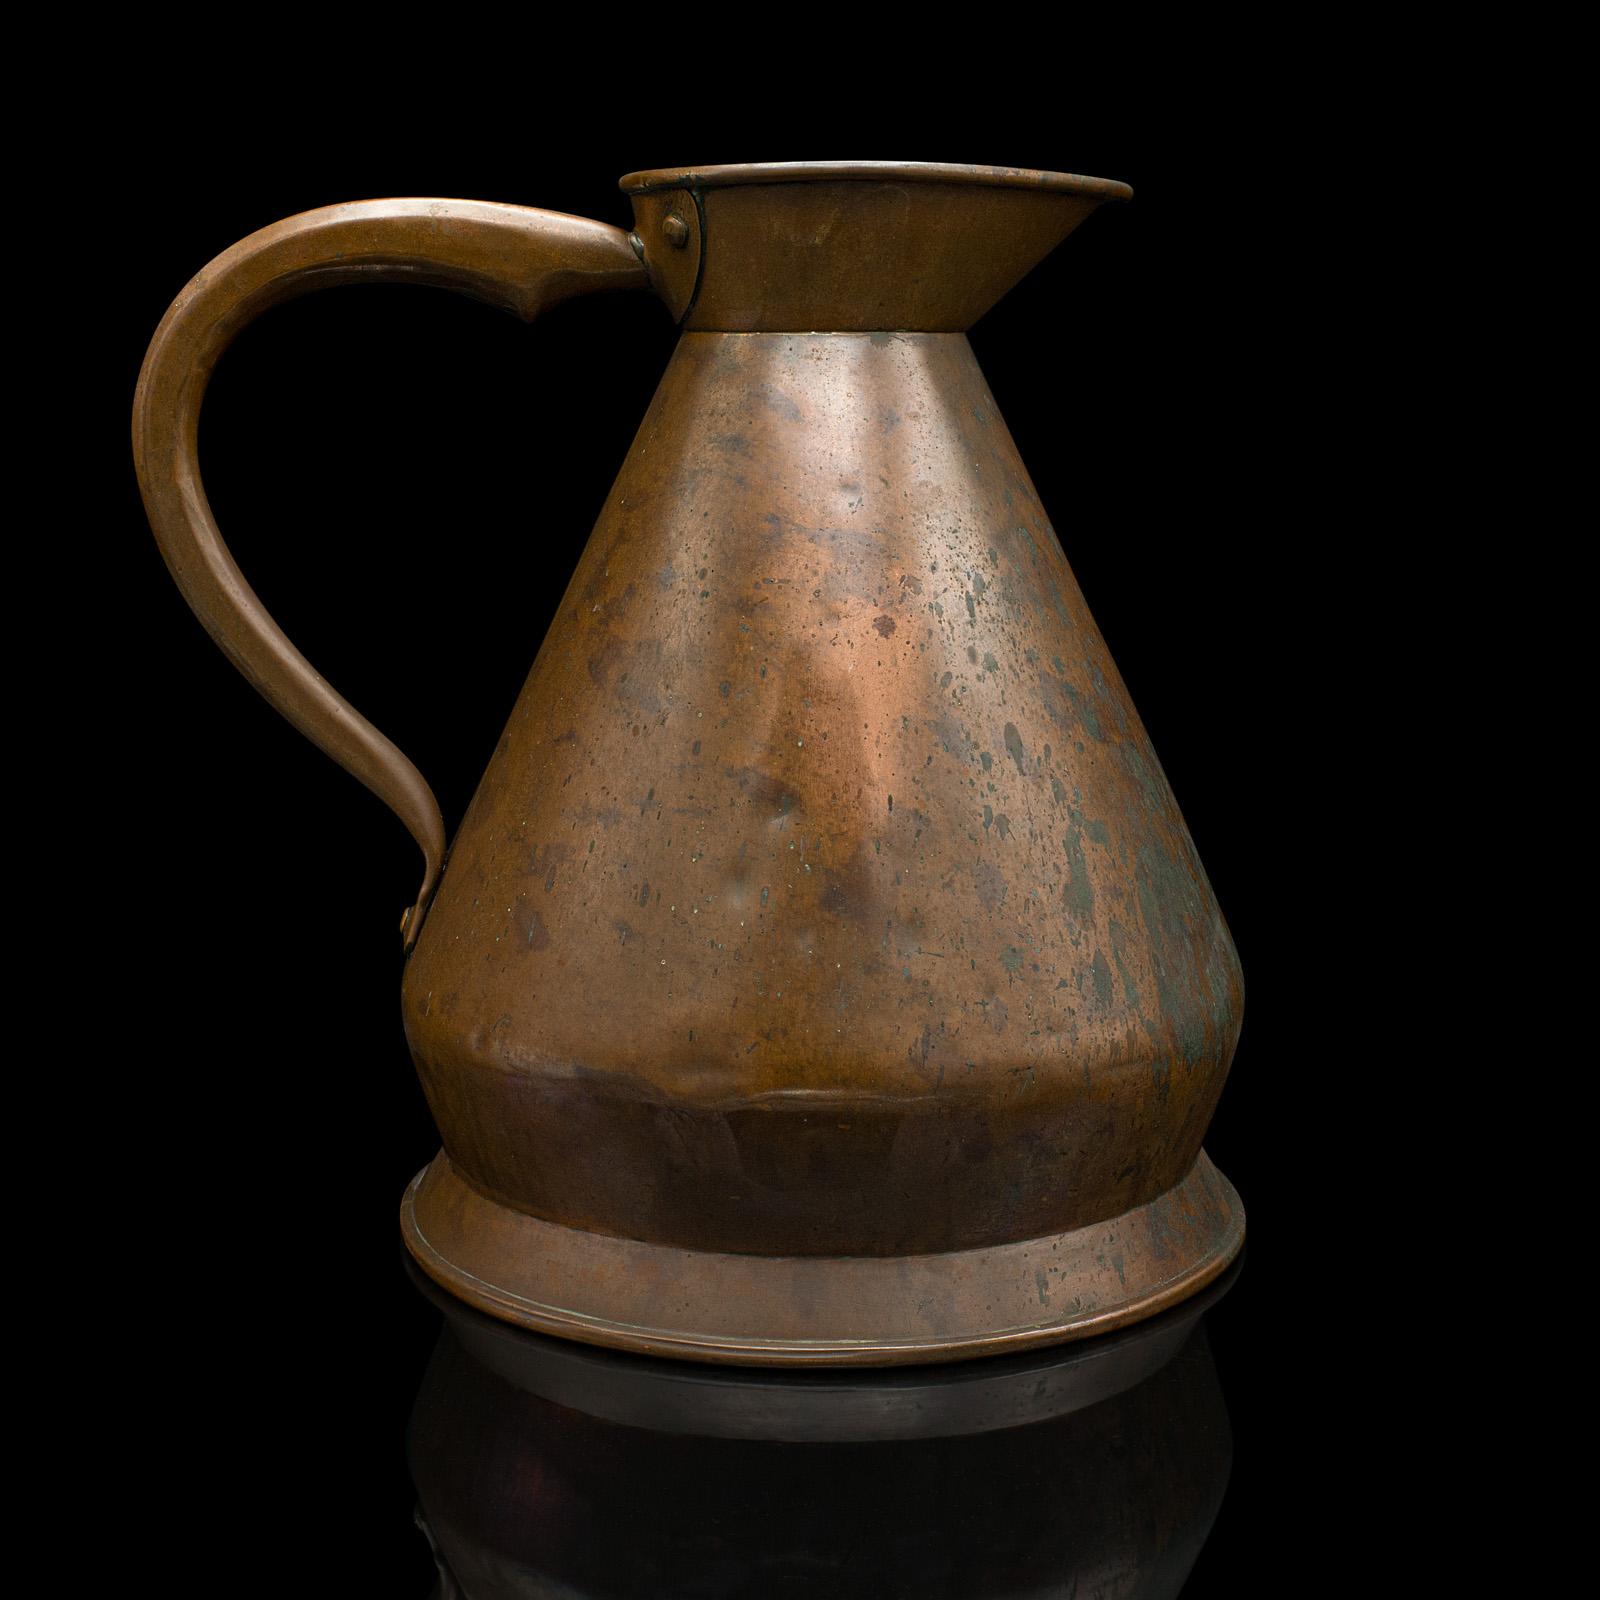 This is a large antique serving jug. An English, copper 2 gallon ewer, dating to the Victorian period, circa 1880.

Fascinatingly sized jug with a wonderful weathered appearance
Displays a desirable aged patina and in good original order
Copper